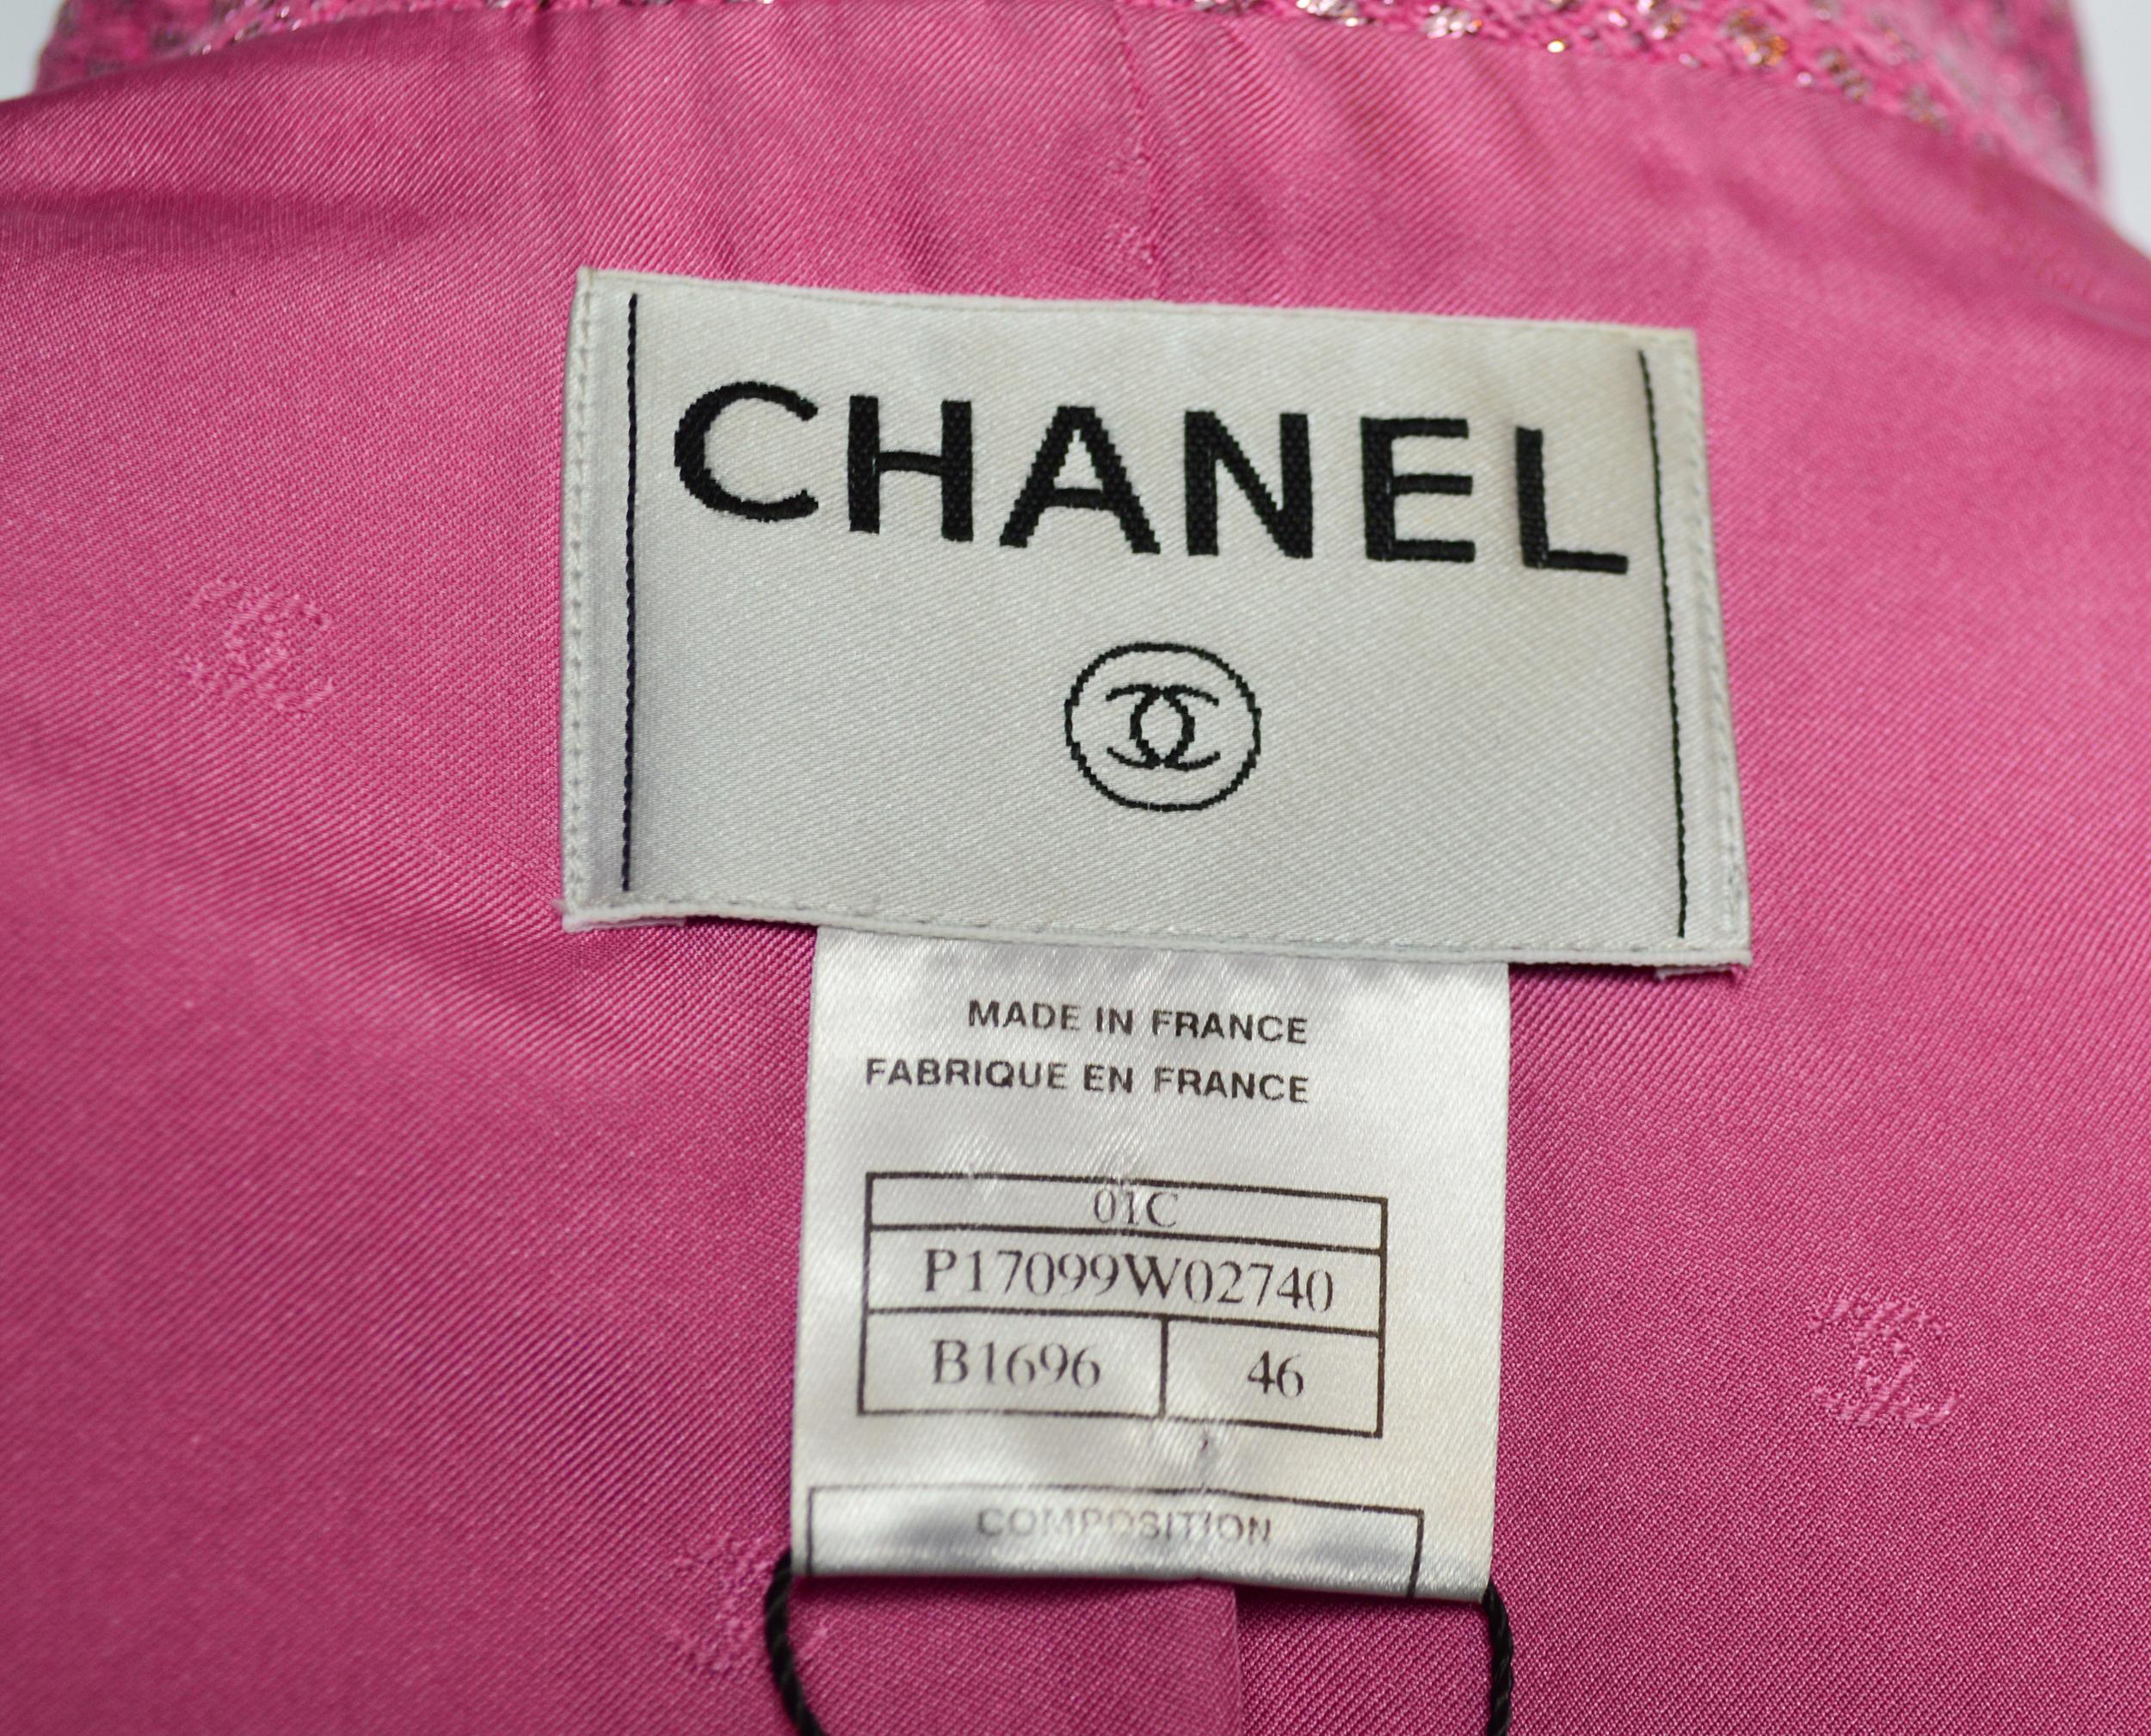 Vintage Chanel Pink and Metallic Blazer, Cruise 2001 Collection 1